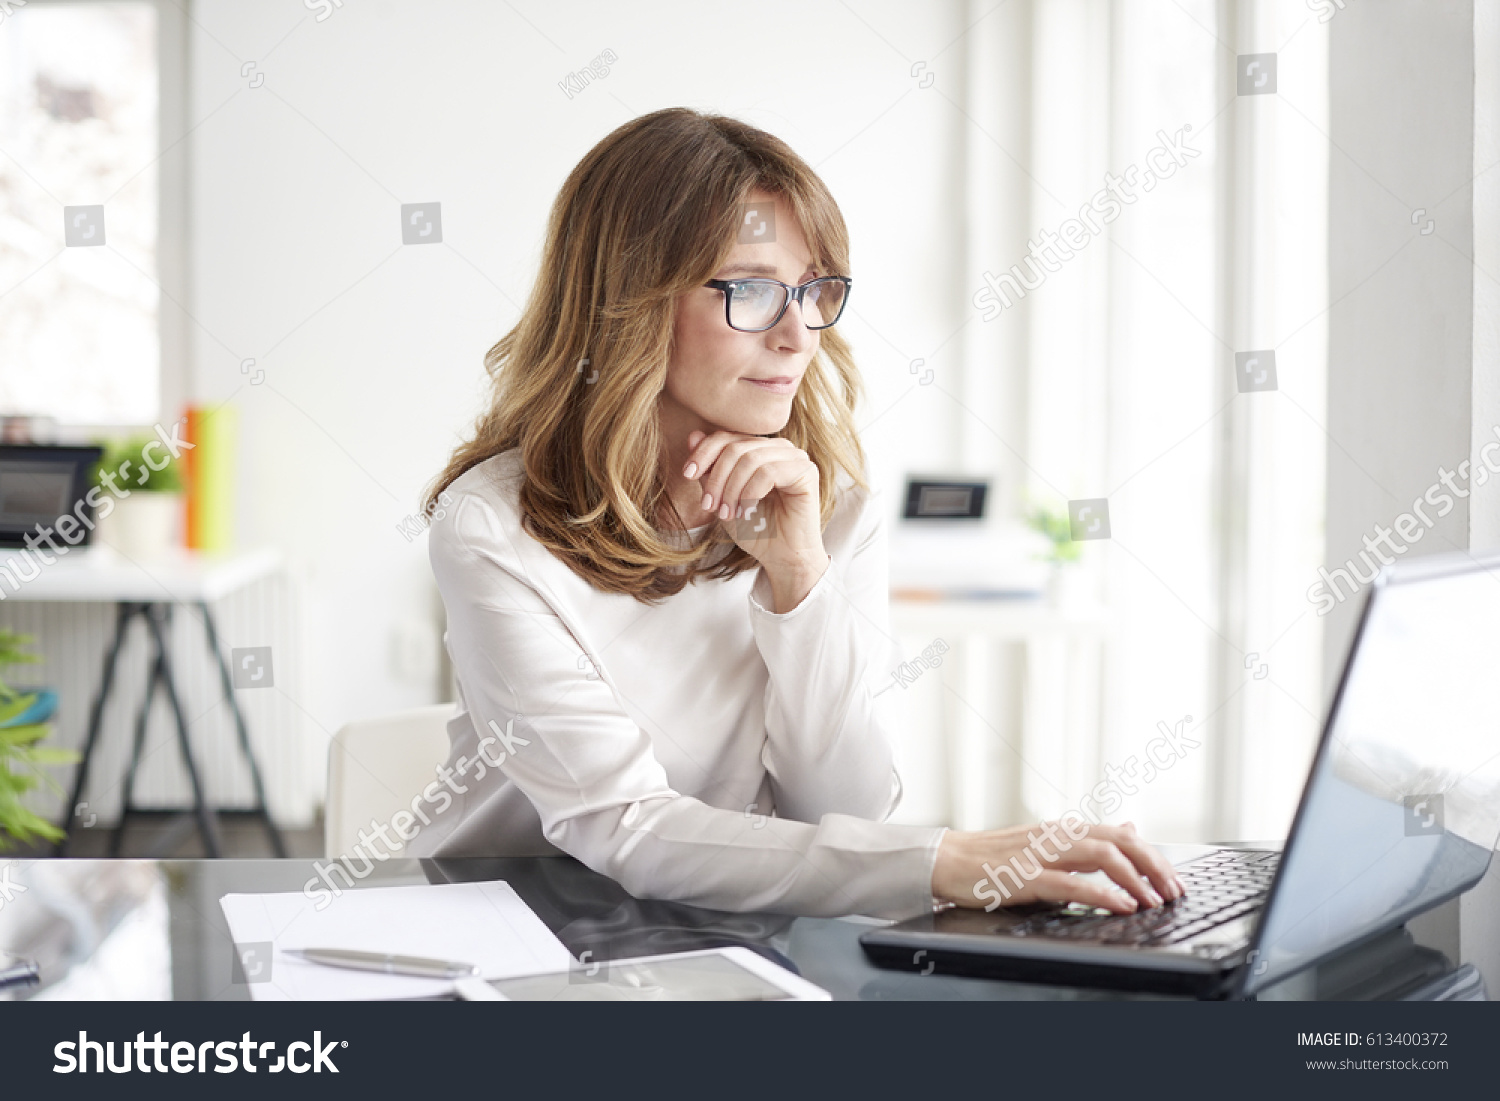 Shot of an attractive mature businesswoman working on laptop in her workstation. #613400372